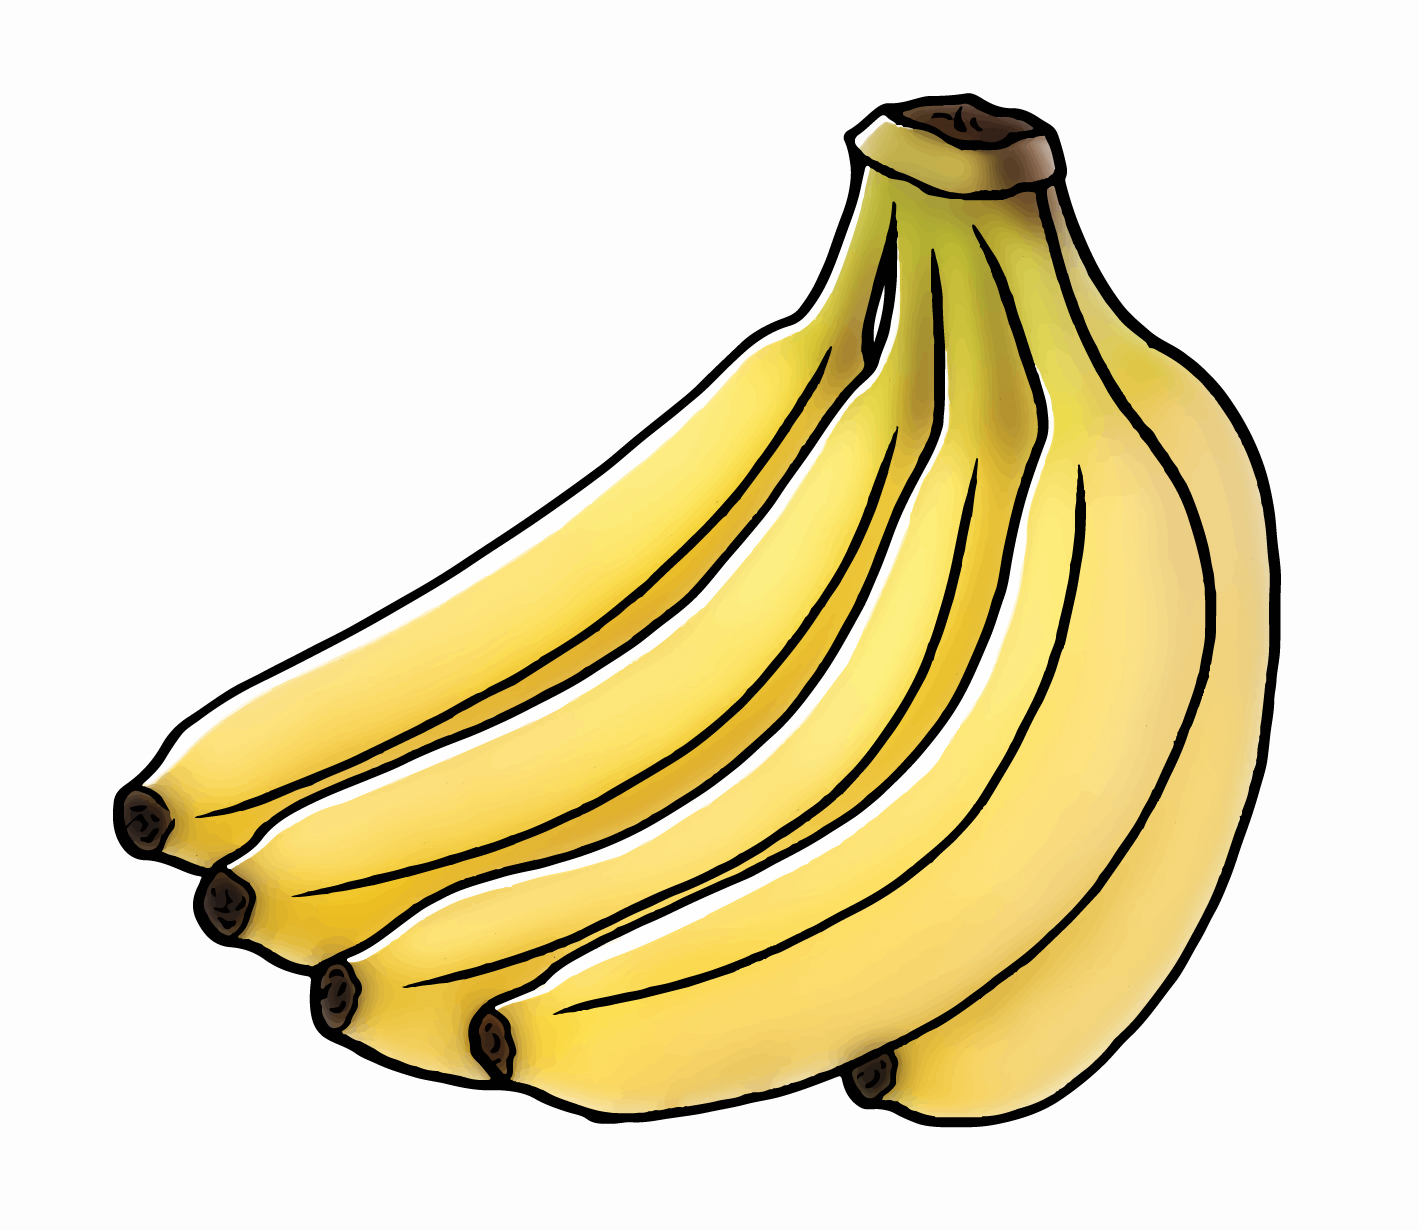 banana clipart picture drawing illustration